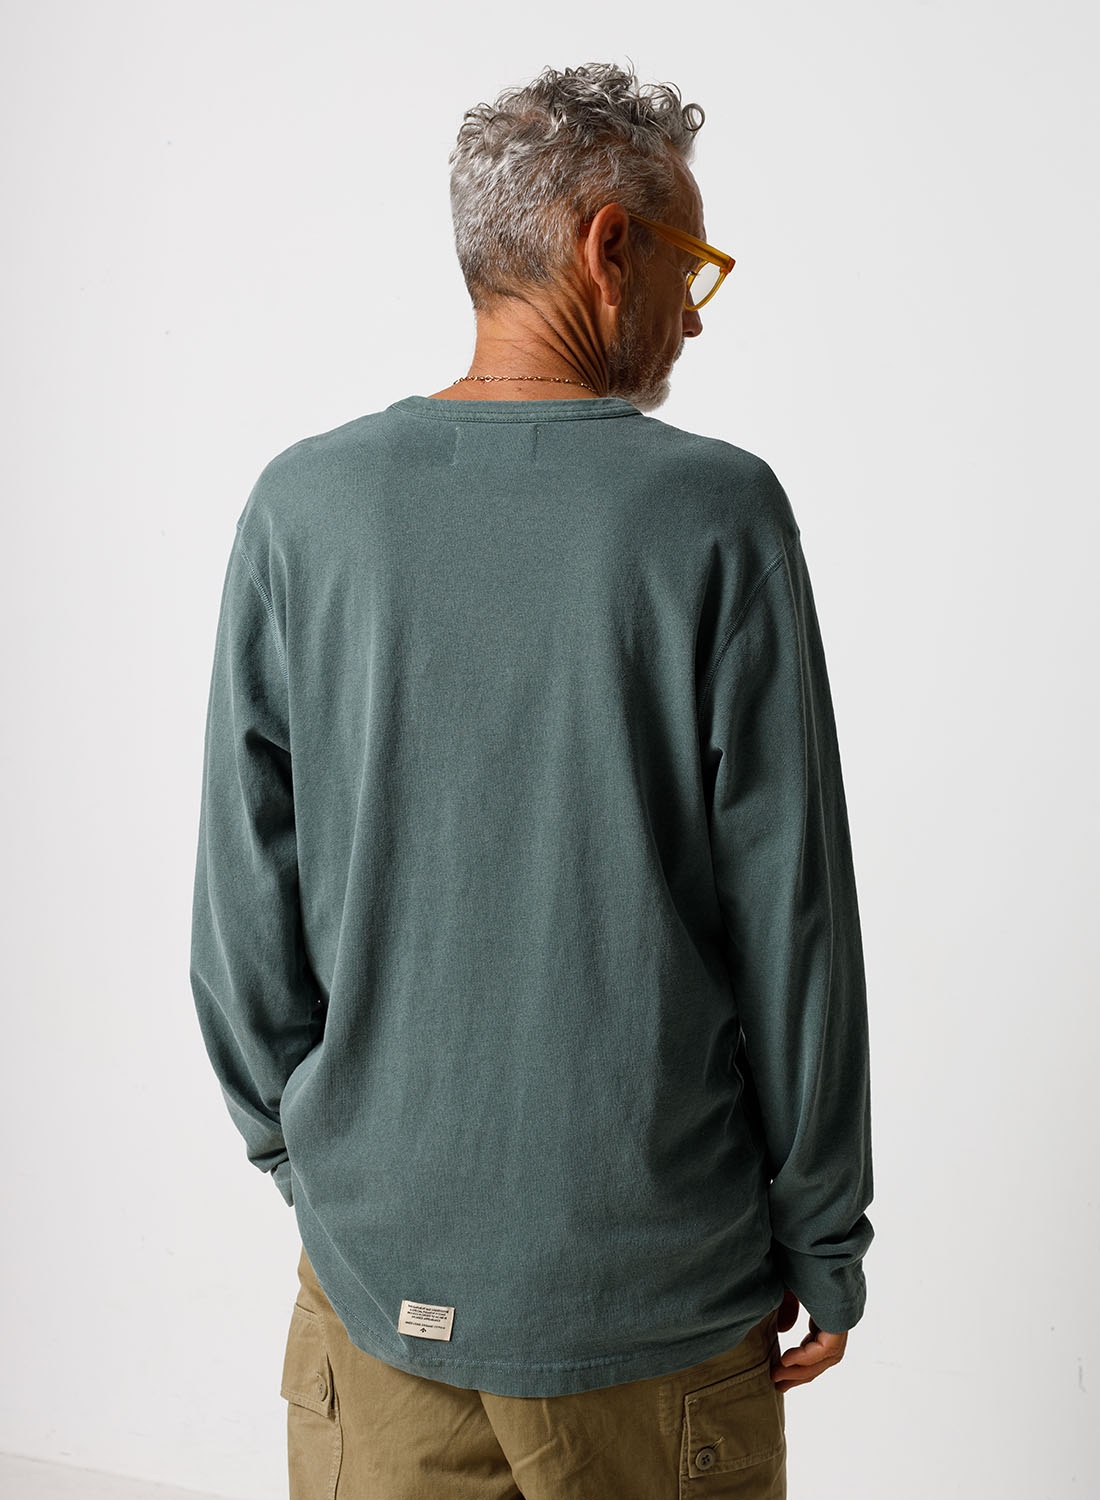 Embroidered Arrow Long Sleeve Tee in Sports Green - 4